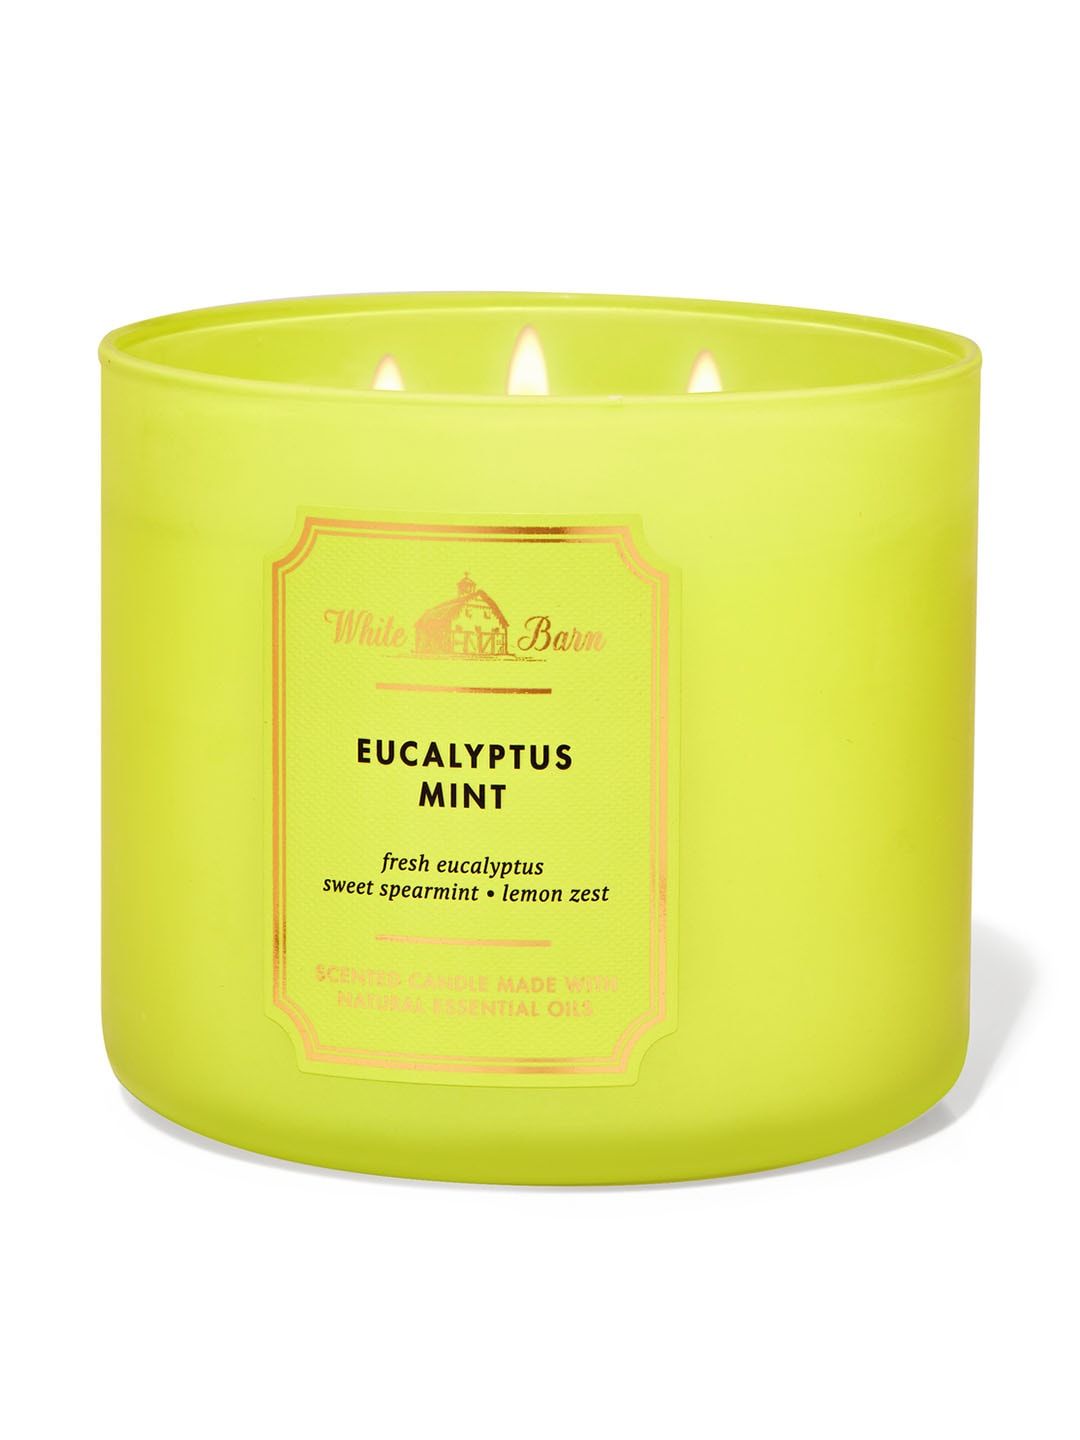 Bath & Body Works Eucalyptus Mint 3-Wick Scented Candle with Essential Oils - 411 g Price in India